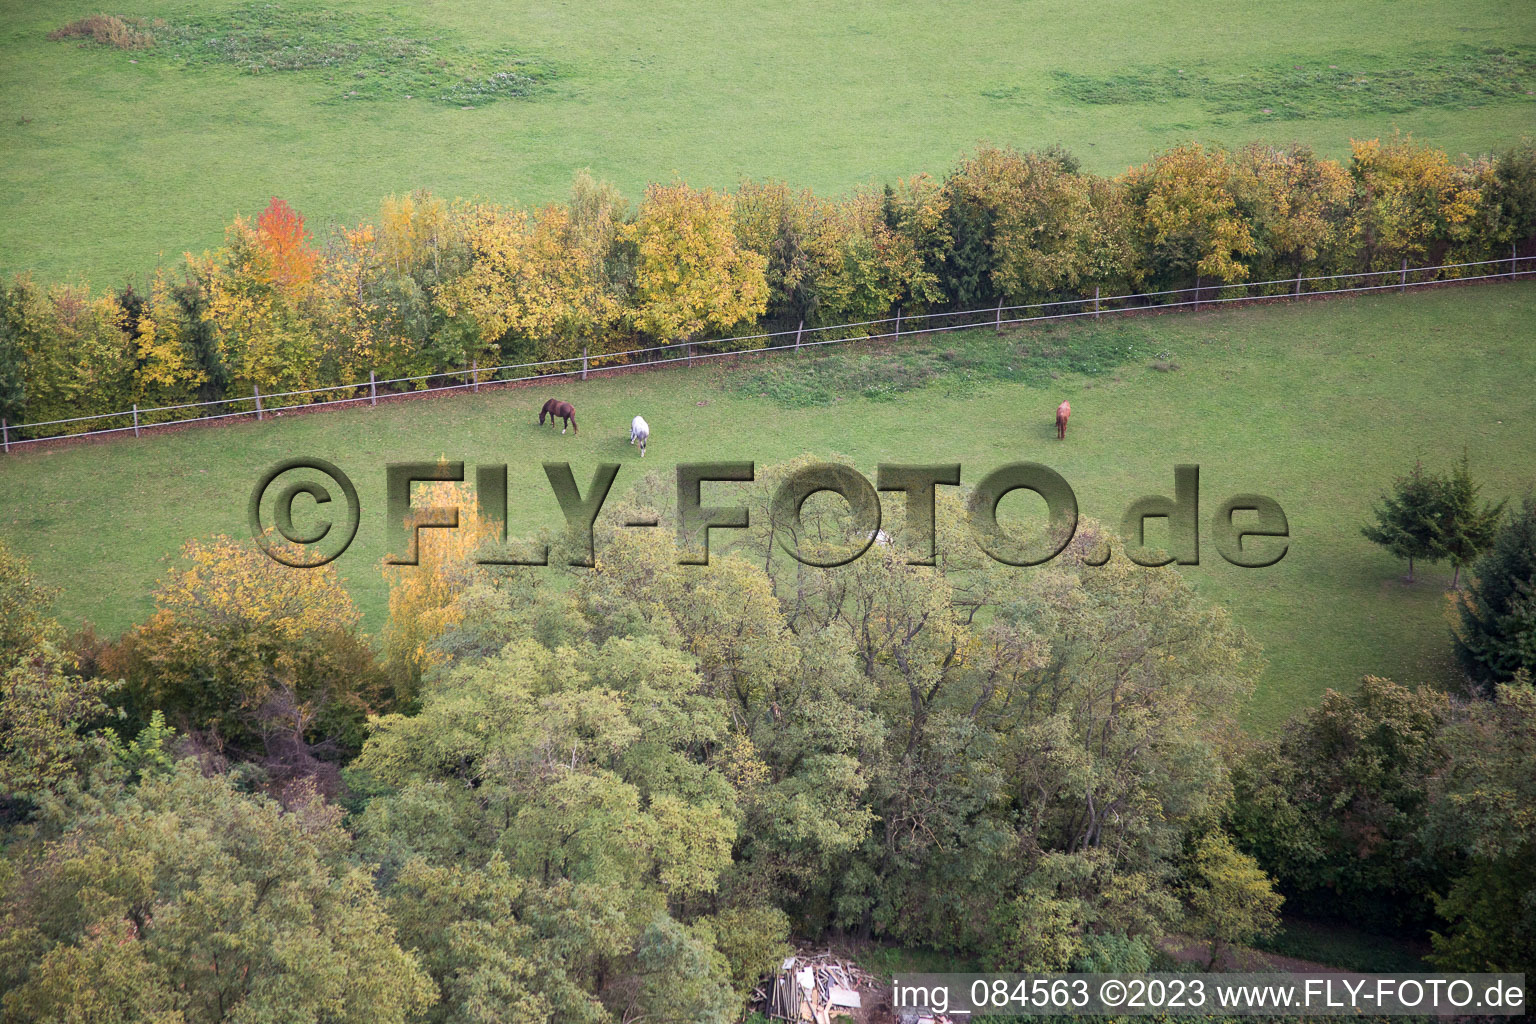 Minfeld in the state Rhineland-Palatinate, Germany seen from a drone